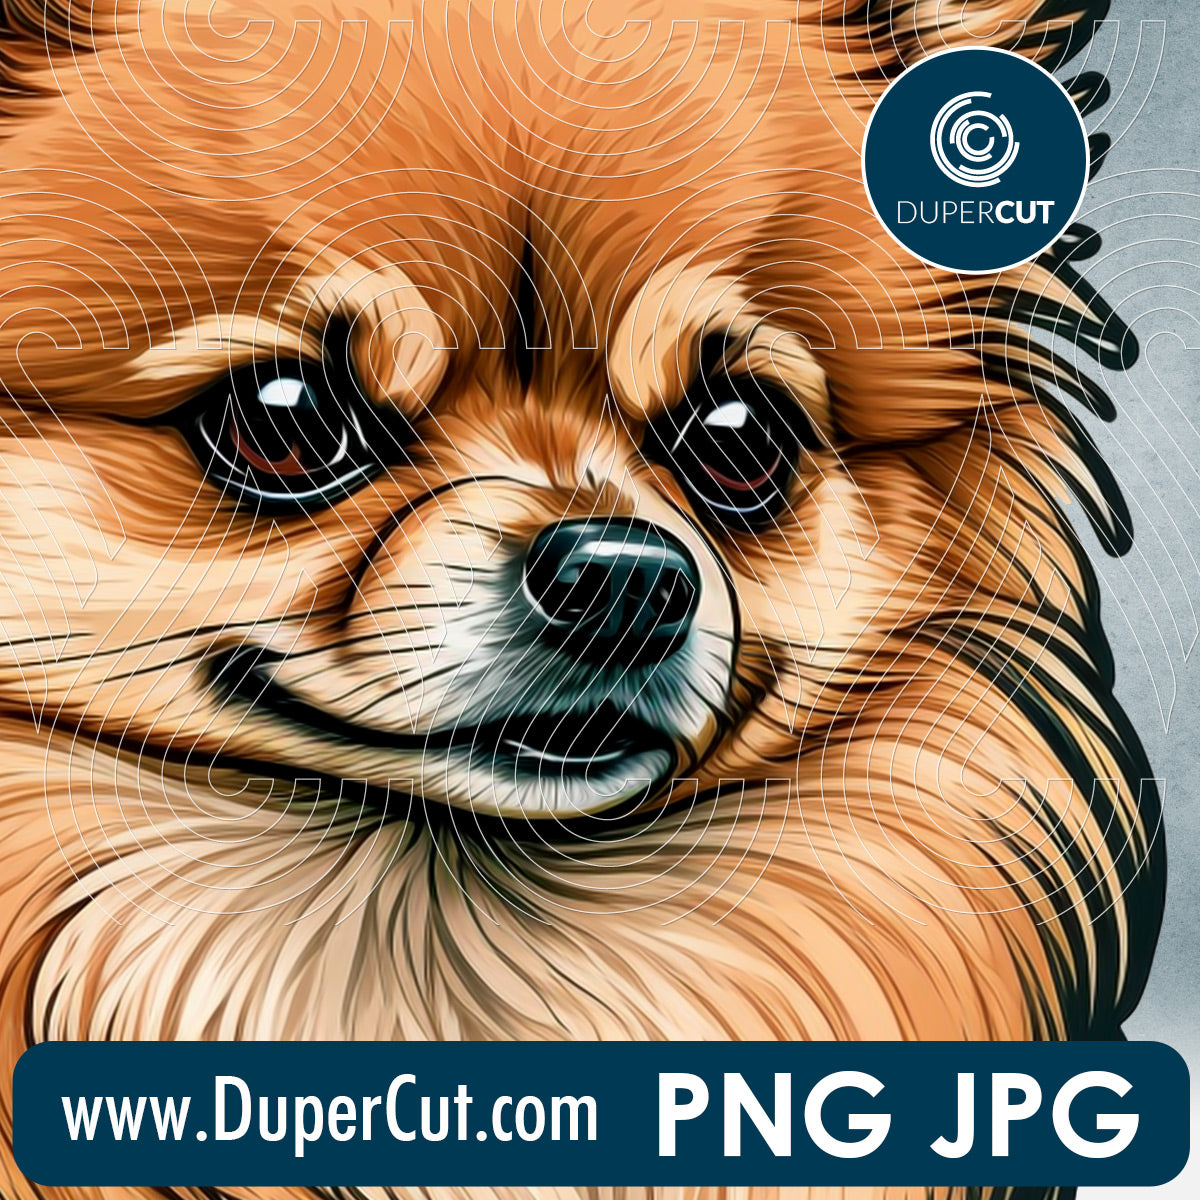 Pomeranian dog breed high resolution template - JPG PNG sublimation files transparent background by www.DuperCut.com